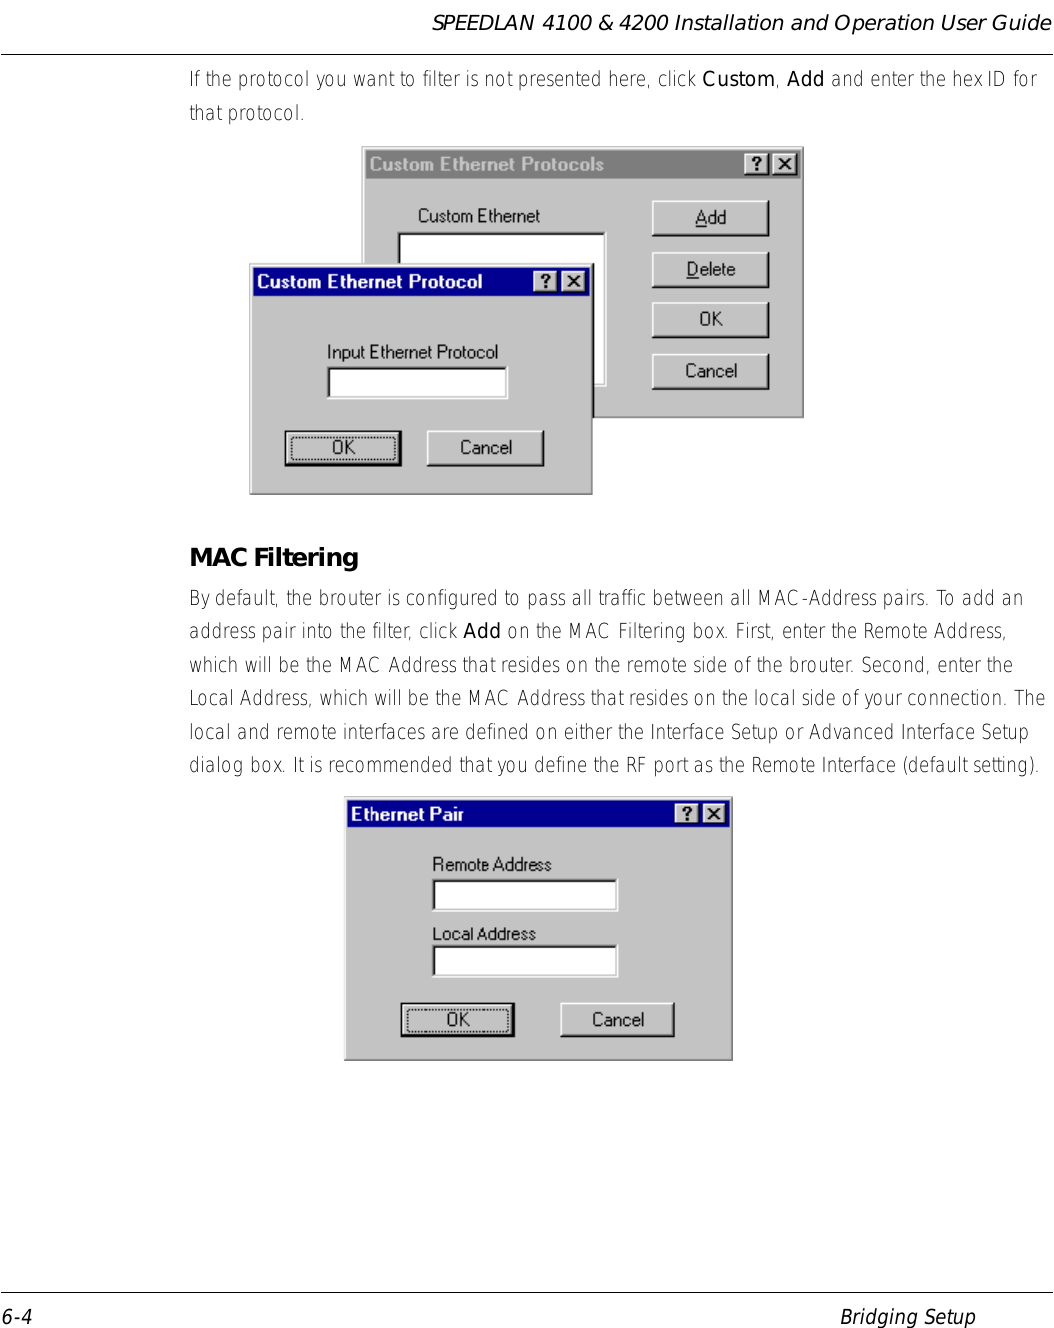 SPEEDLAN 4100 &amp; 4200 Installation and Operation User Guide 6-4 Bridging SetupIf the protocol you want to filter is not presented here, click Custom, Add and enter the hex ID for that protocol.  MAC FilteringBy default, the brouter is configured to pass all traffic between all MAC-Address pairs. To add an address pair into the filter, click Add on the MAC Filtering box. First, enter the Remote Address, which will be the MAC Address that resides on the remote side of the brouter. Second, enter the Local Address, which will be the MAC Address that resides on the local side of your connection. The local and remote interfaces are defined on either the Interface Setup or Advanced Interface Setup dialog box. It is recommended that you define the RF port as the Remote Interface (default setting). 